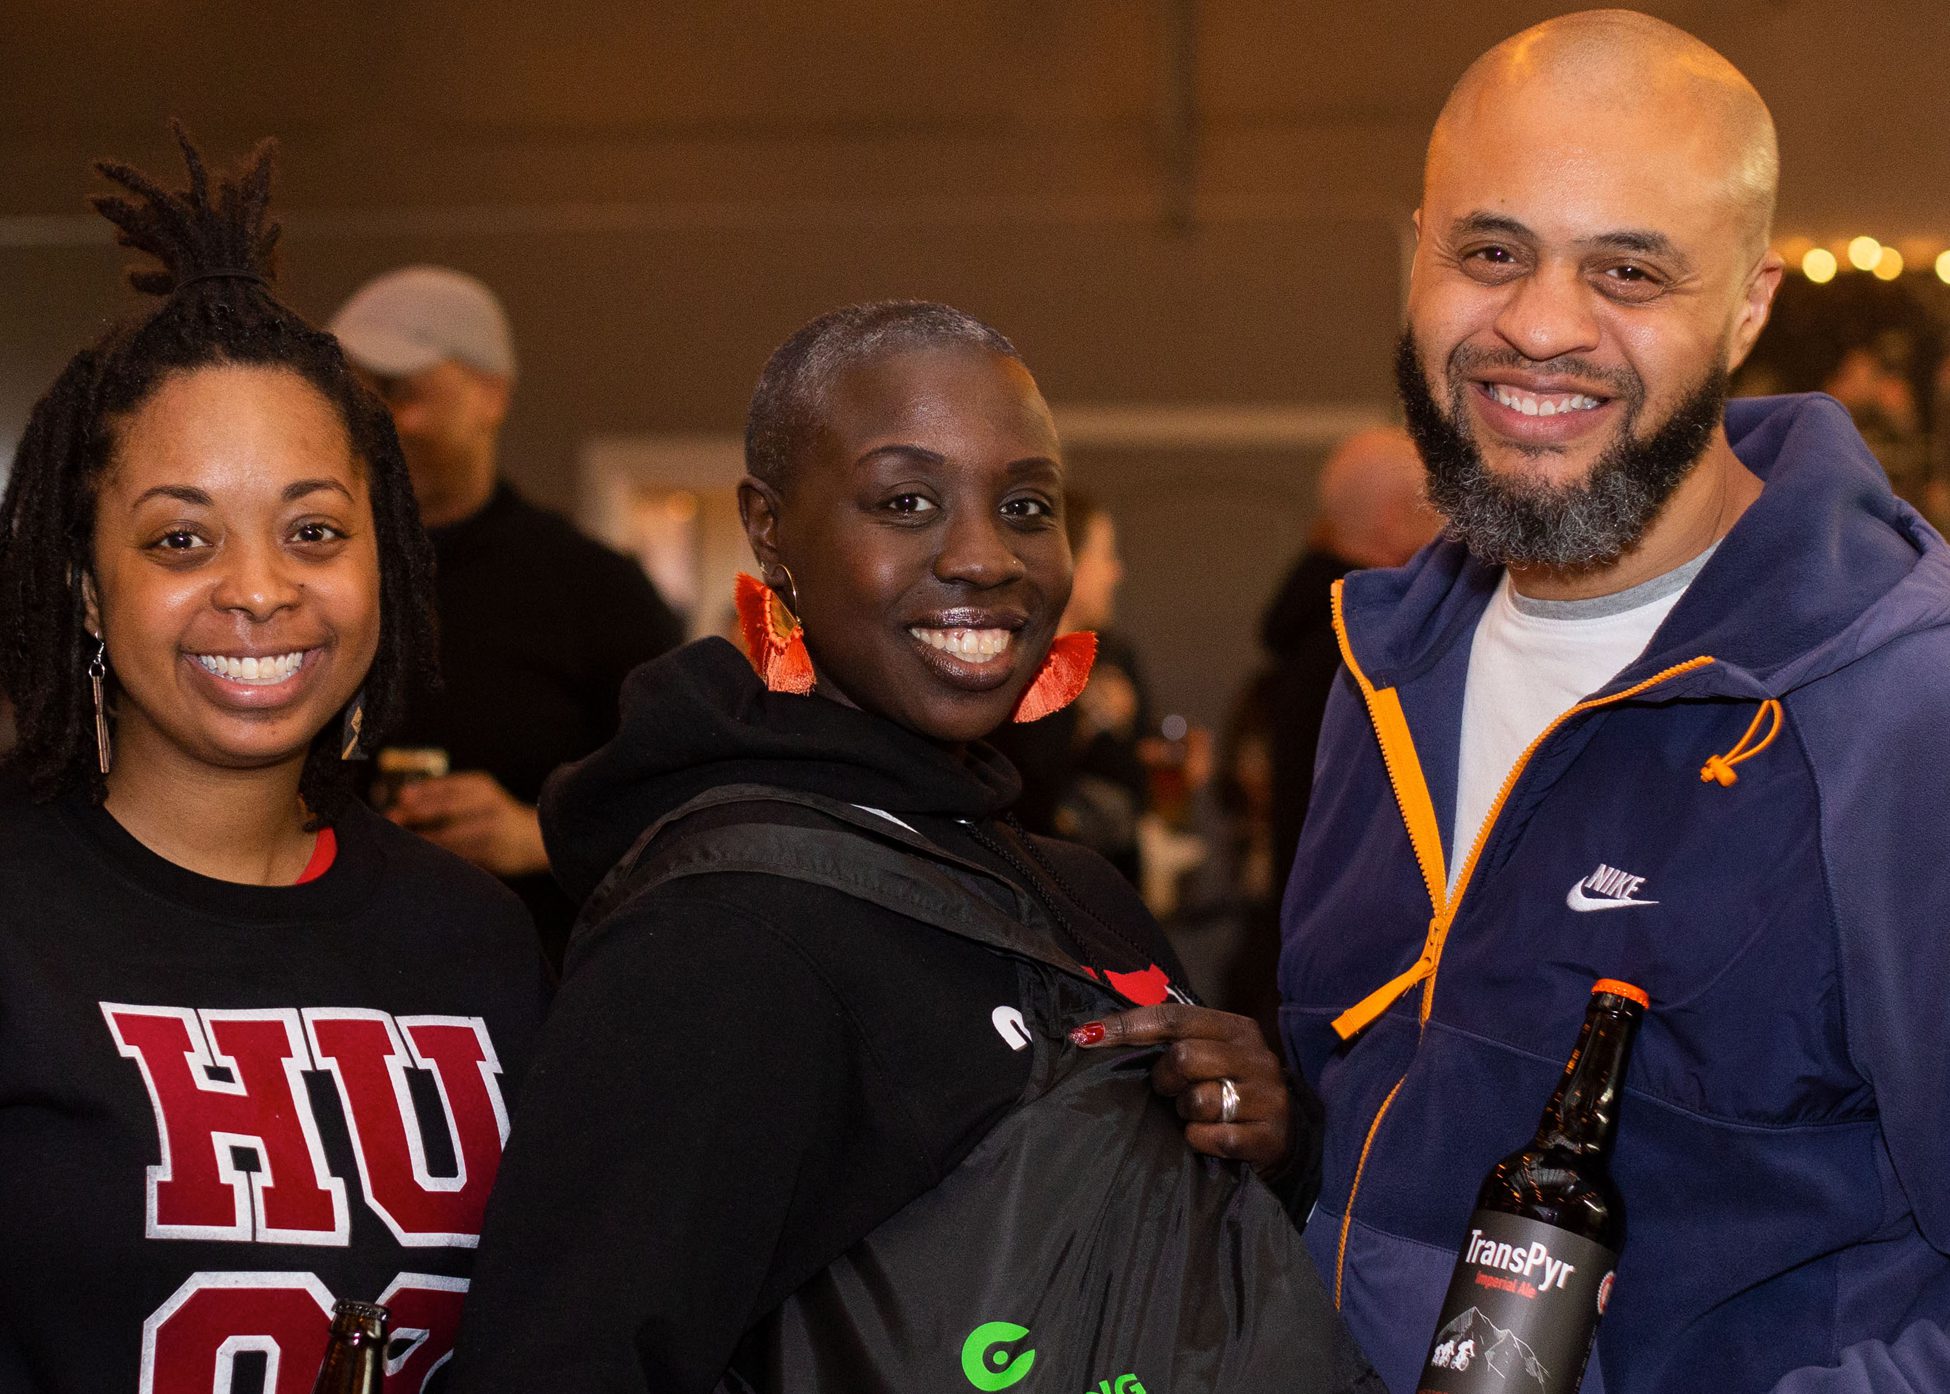 Three people smiling at the camera. One person is holding a TransPyr beer.